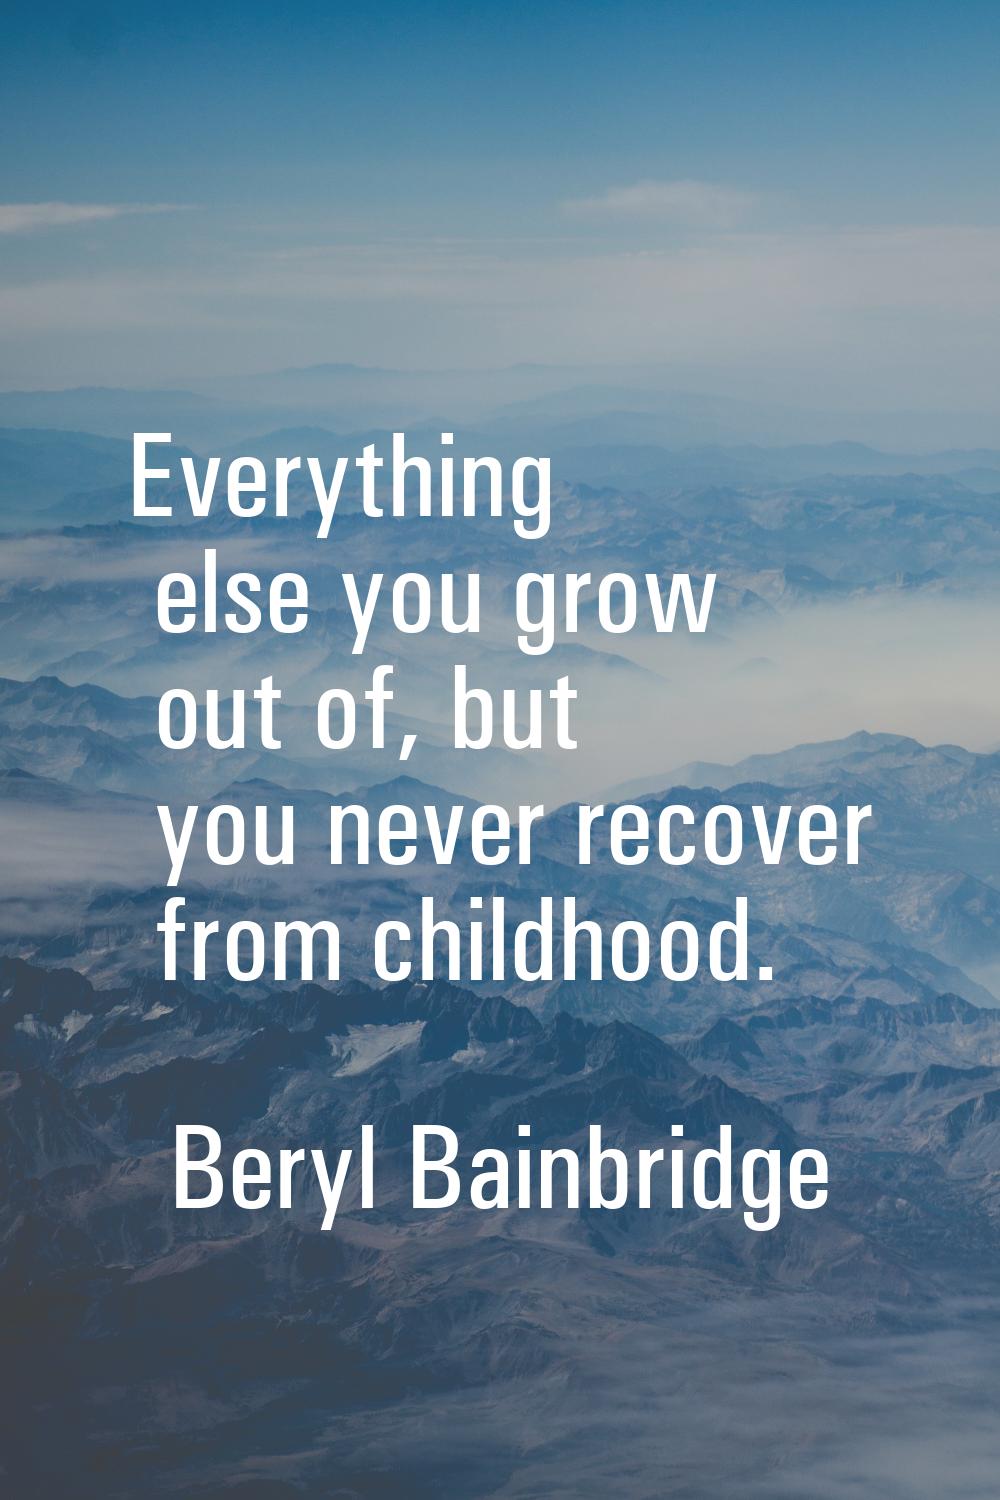 Everything else you grow out of, but you never recover from childhood.